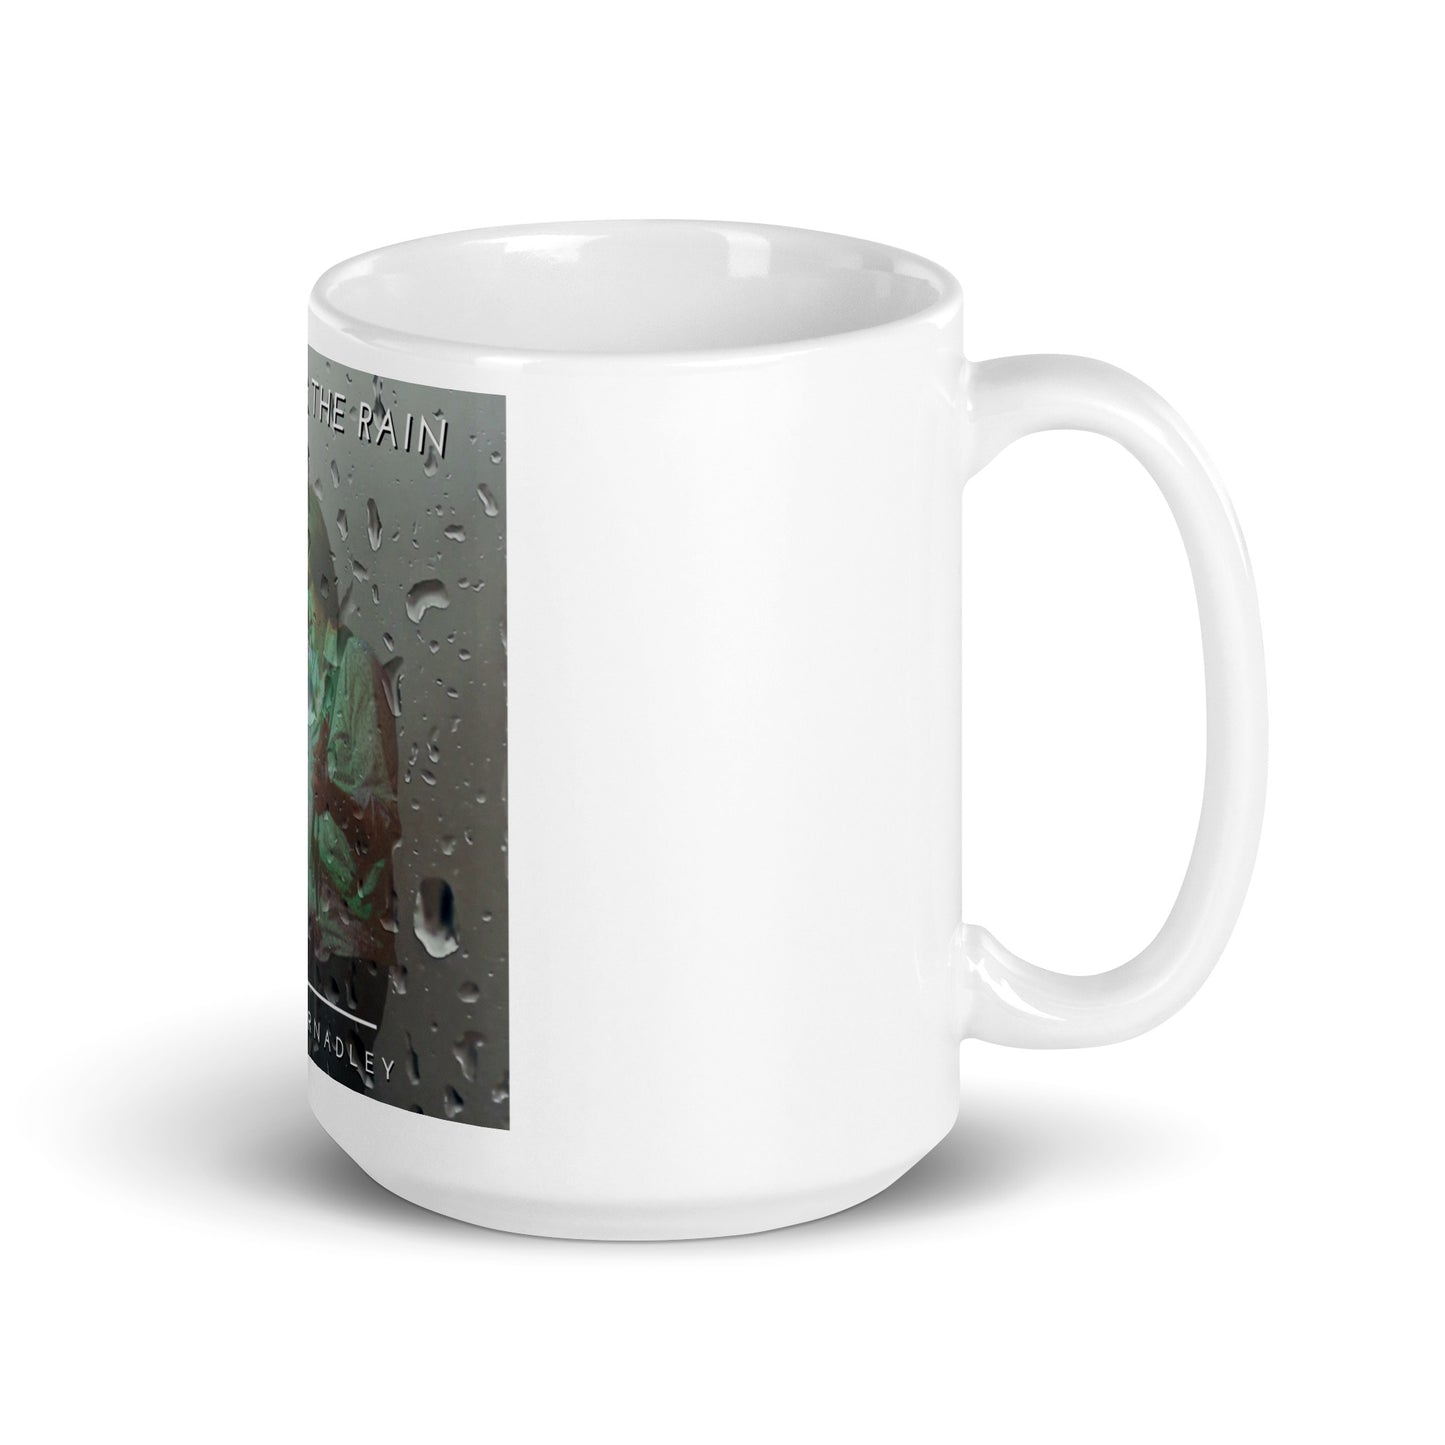 Driving In The Rain Coffee Cup